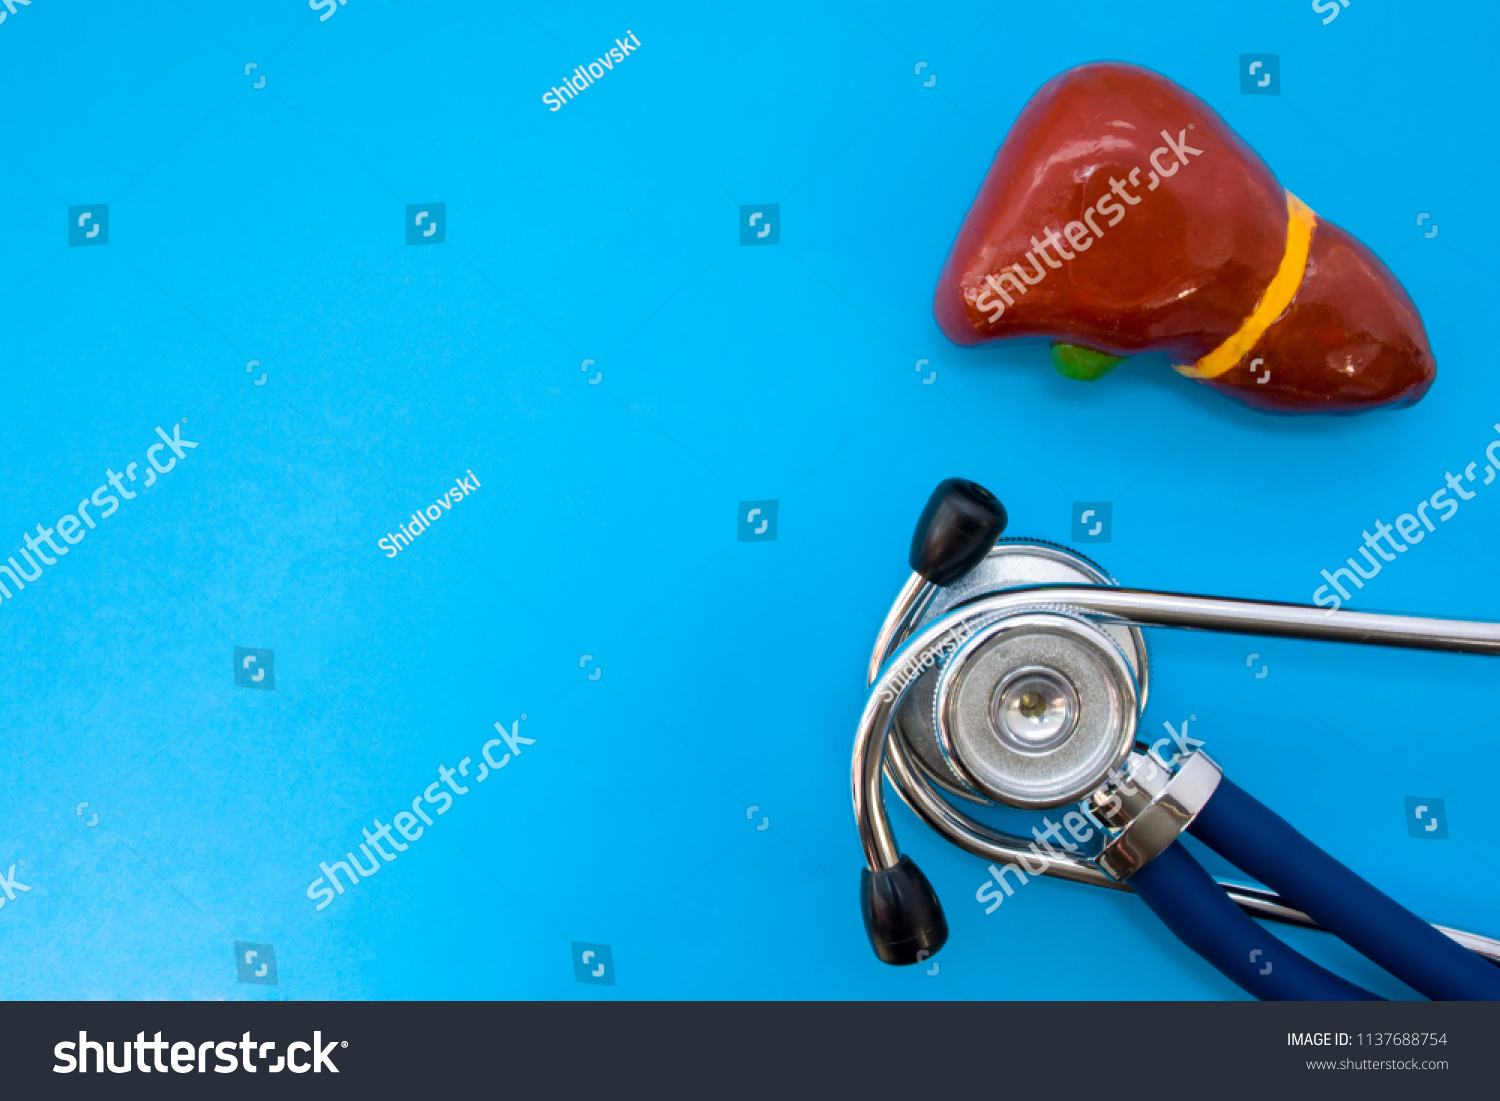 Anatomic study model of liver or hepar and stethoscope on blue background occupy half of photo, in second half - empty space for titles. Medical concept photo for use in hepatology, surgery, oncology #1137688754